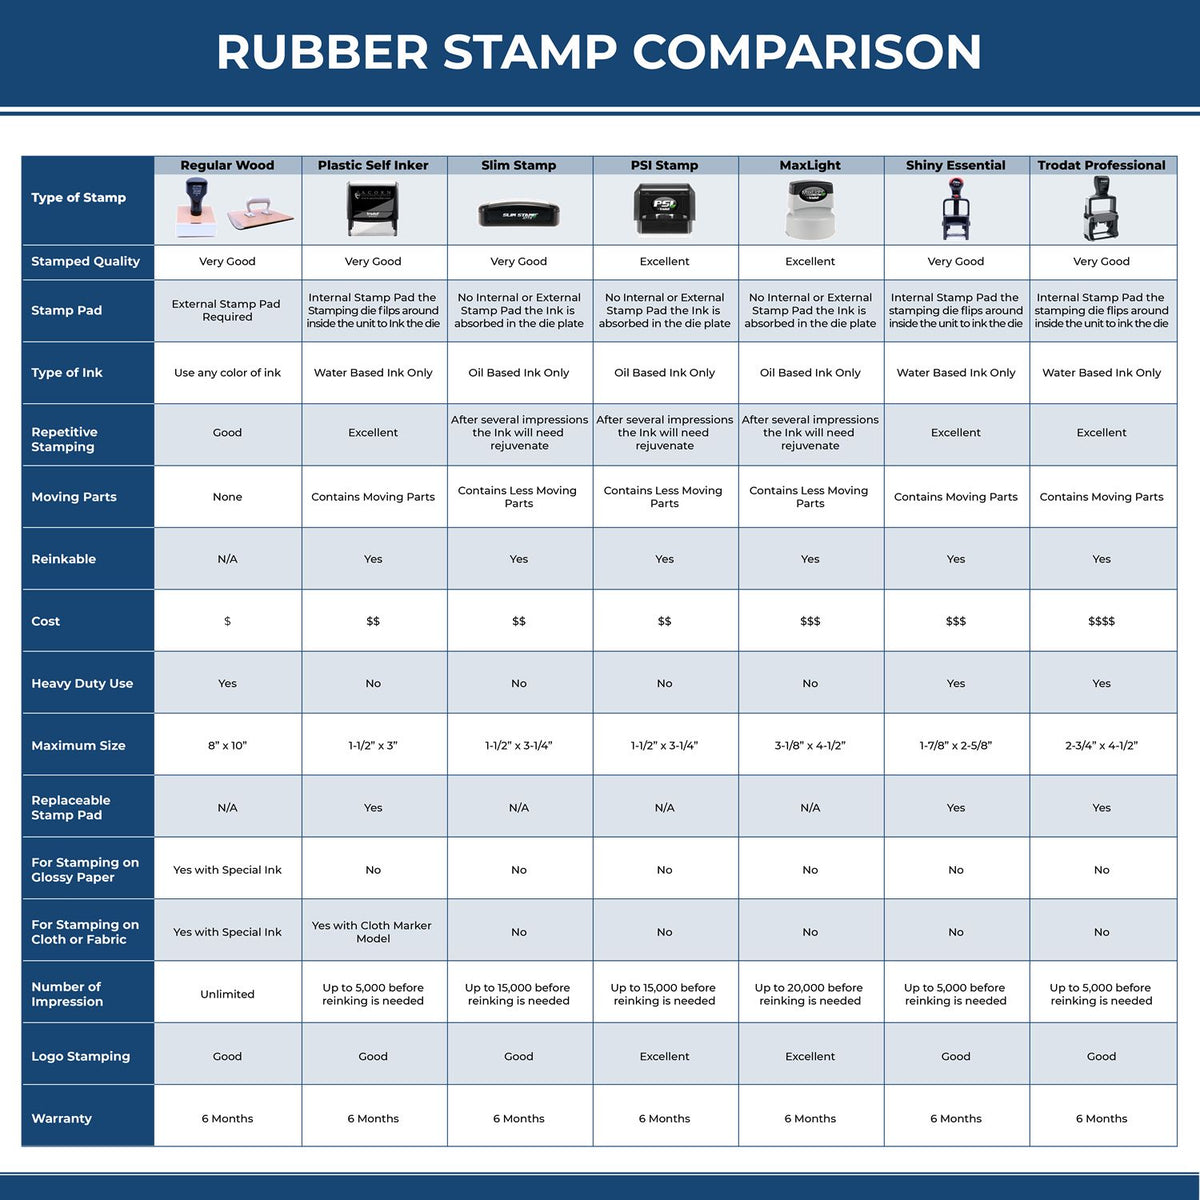 Self Inking Terrific Stamp 4359S Rubber Stamp Comparison